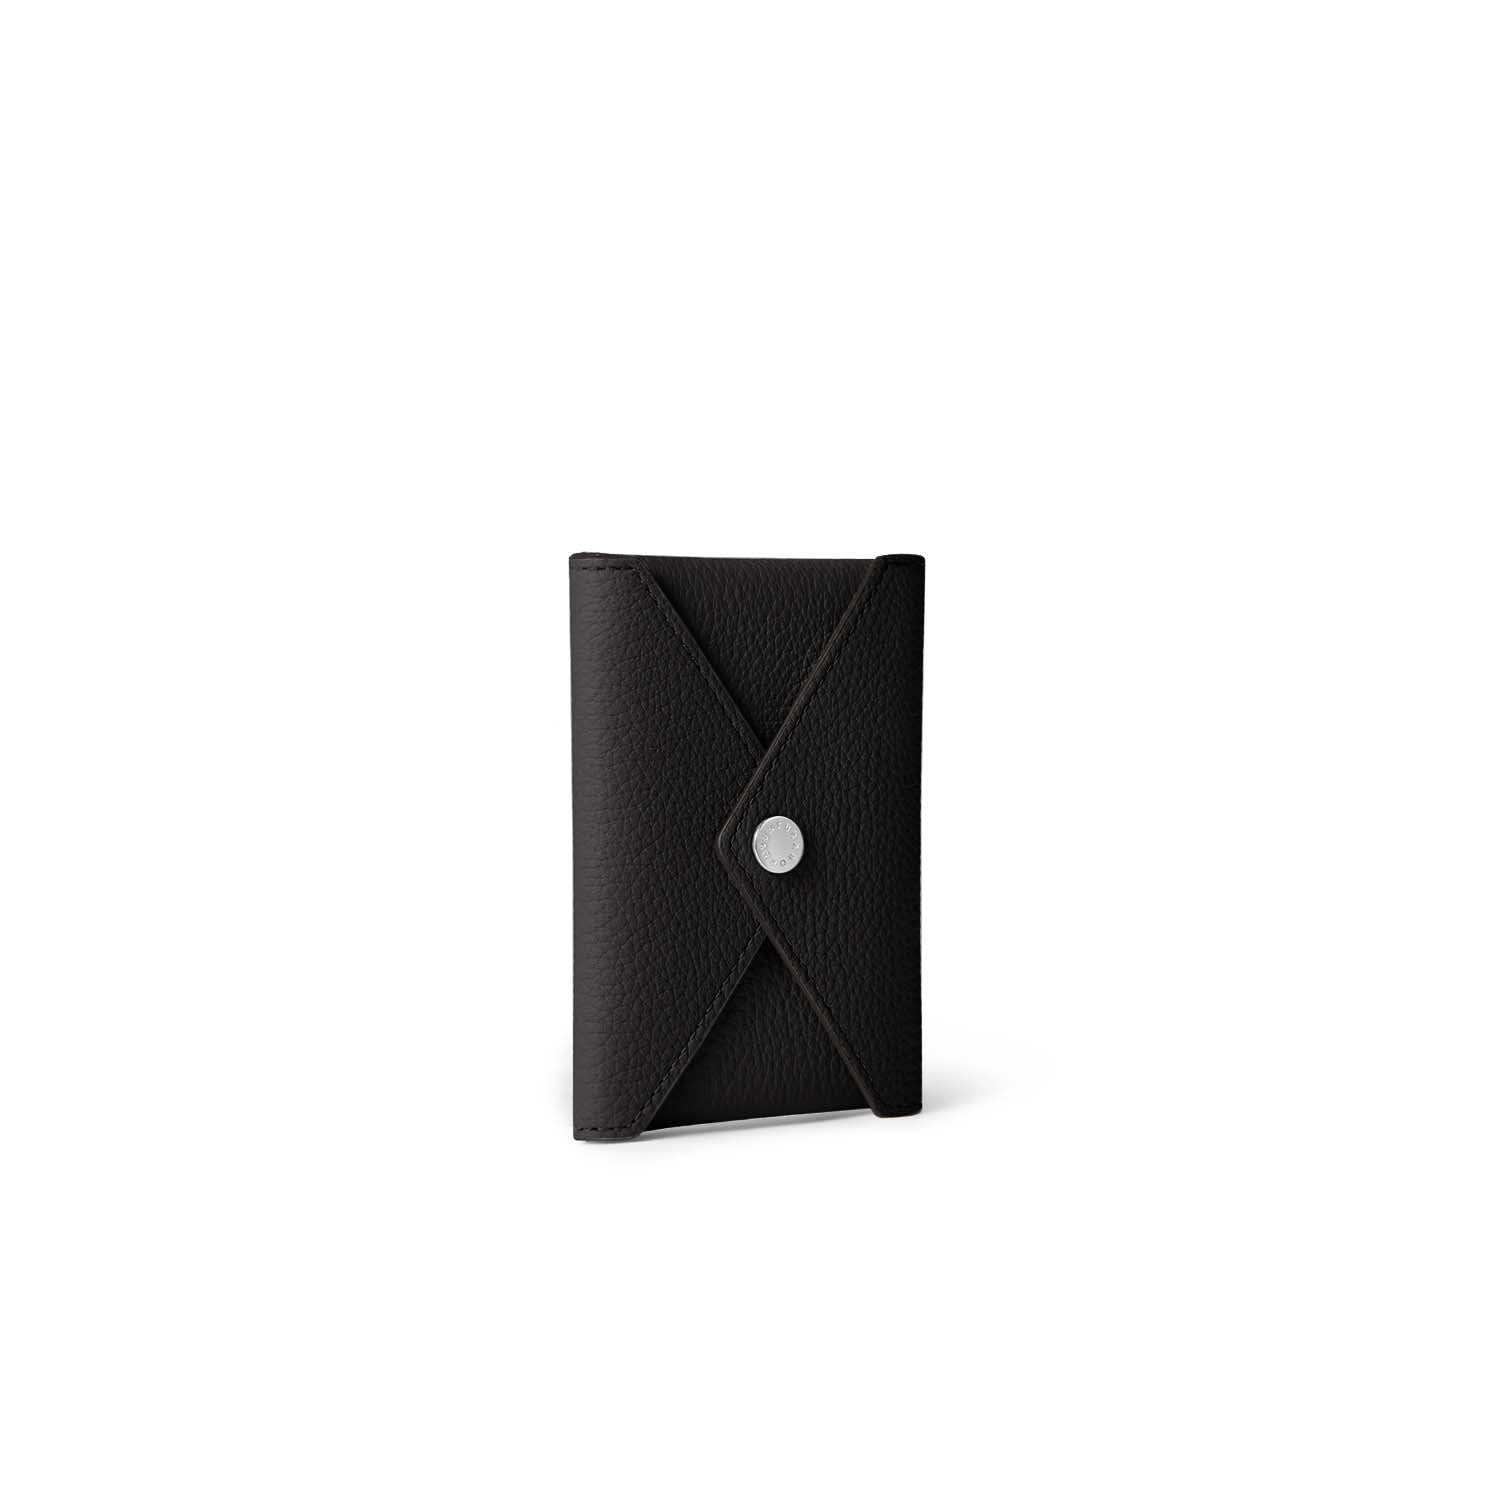 (Snap button back cover case) Envelope pouch in shrink leather